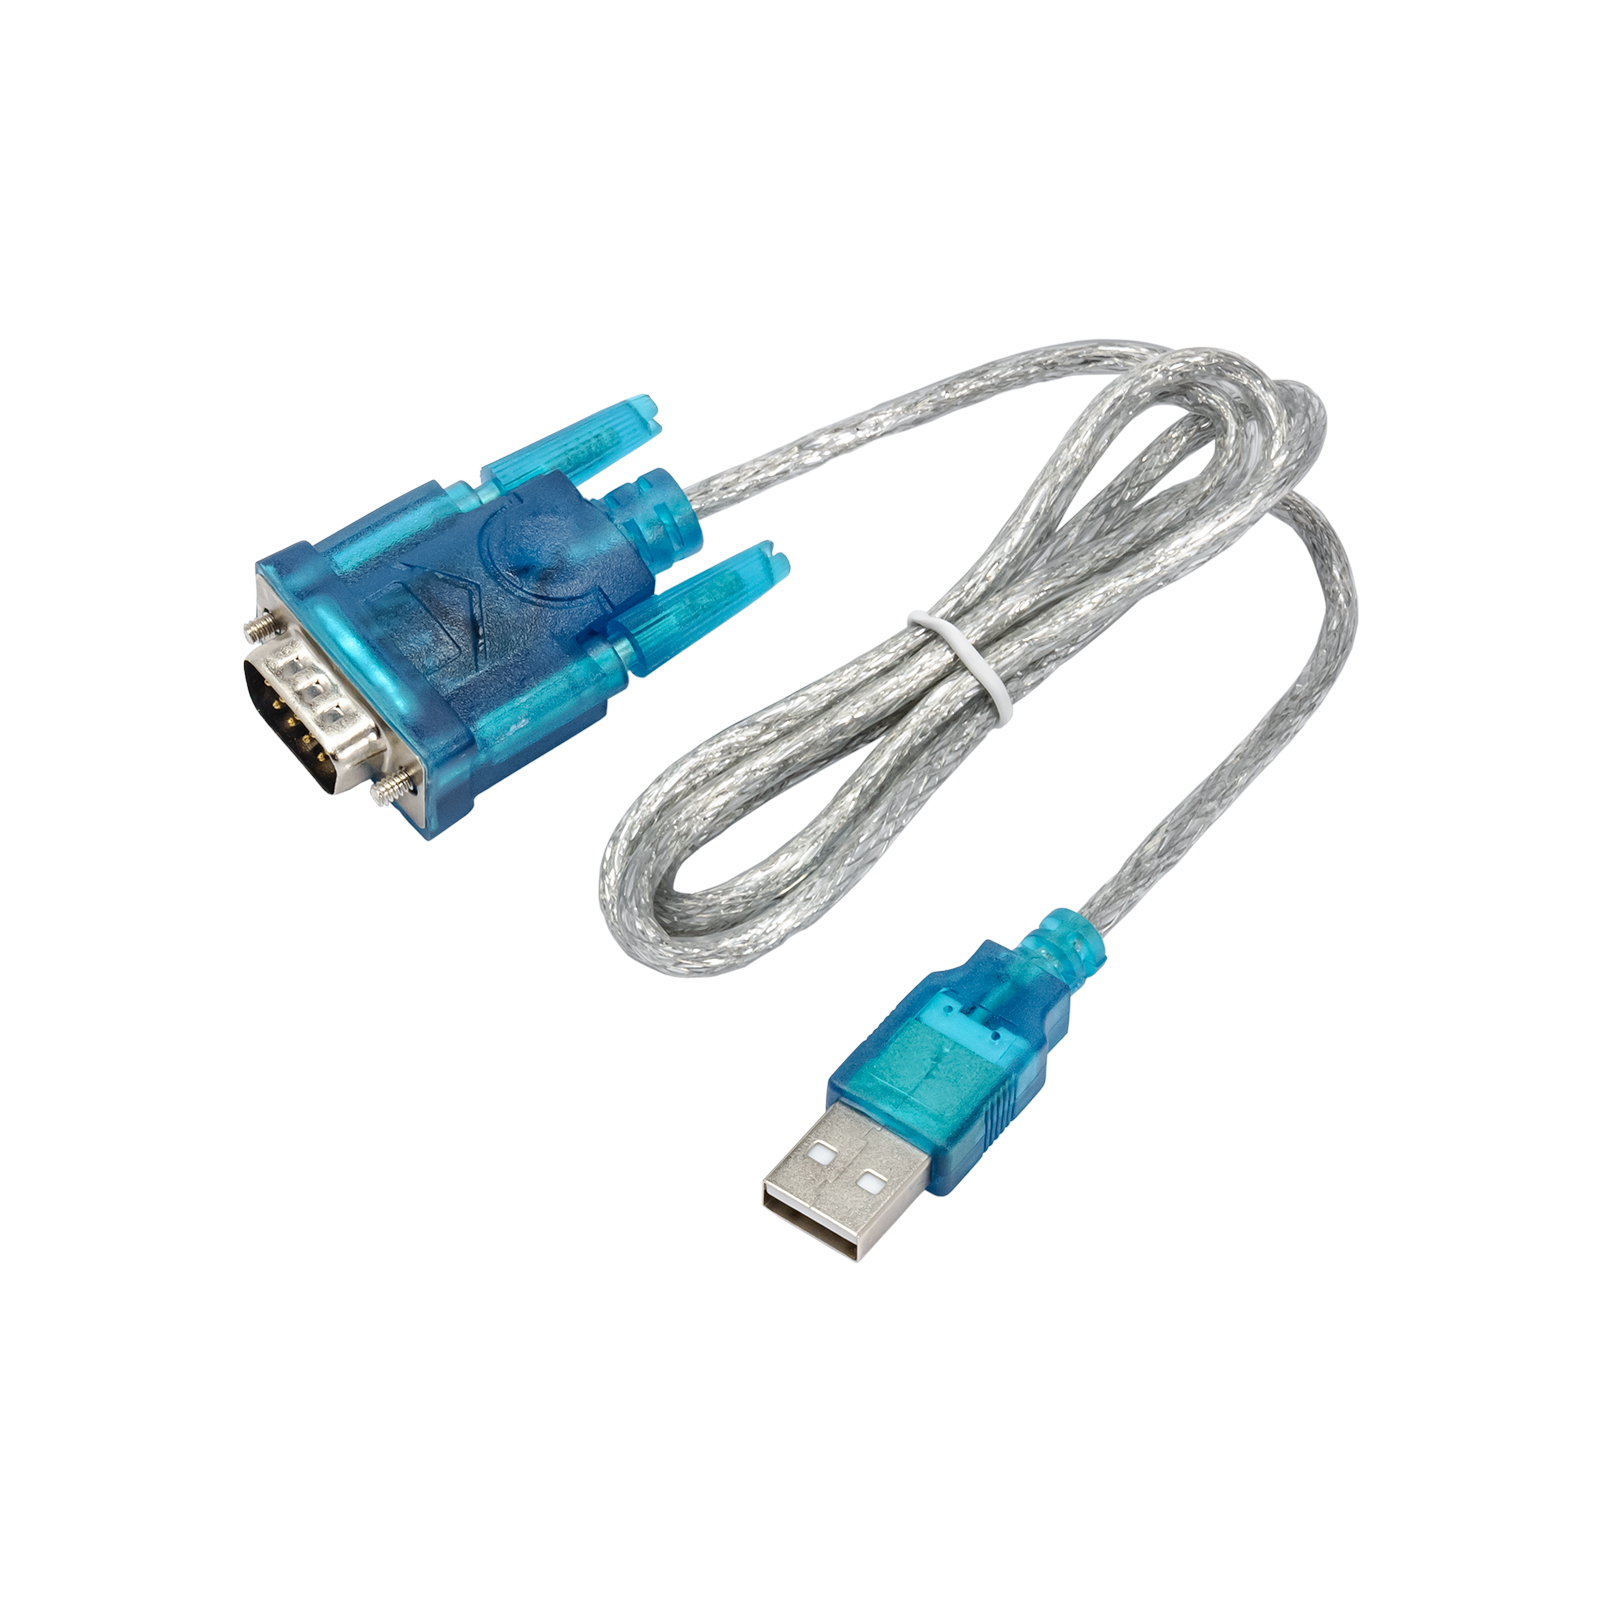 Main image Cable AK-CO-02 USB / RS-232